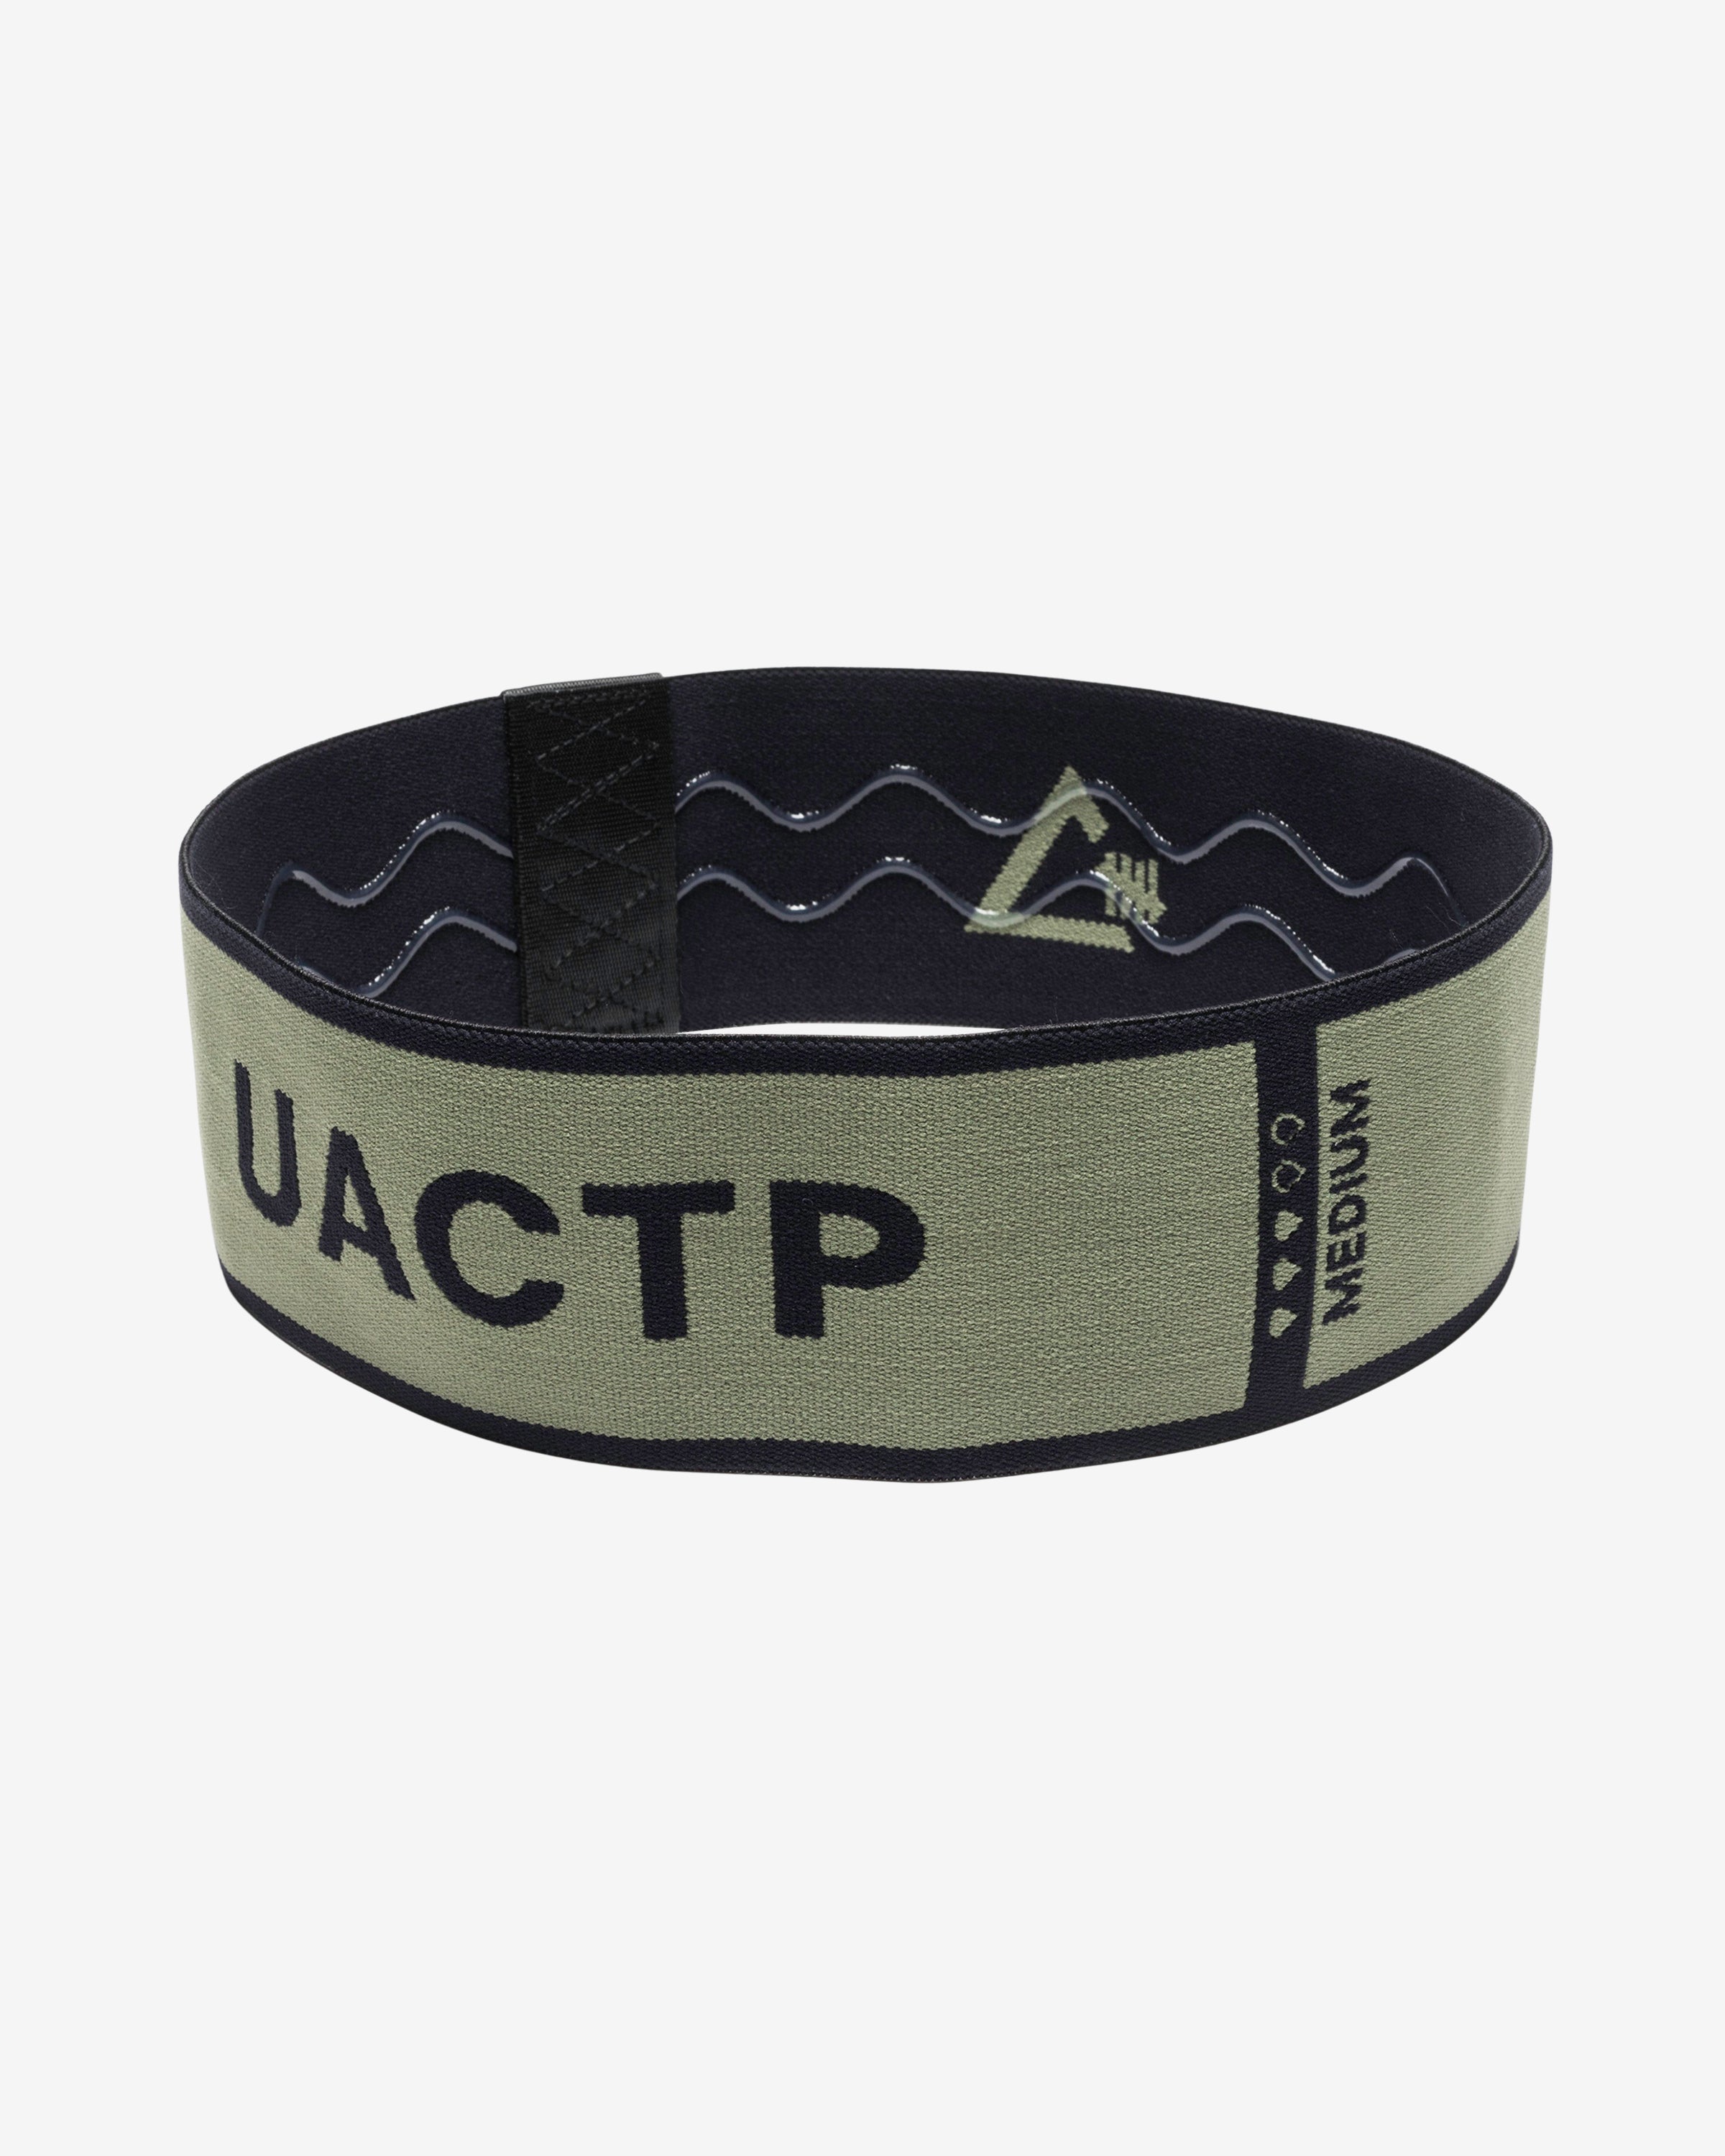 UACTP FULL FUNCTION FABRIC RESISTANCE BANDS